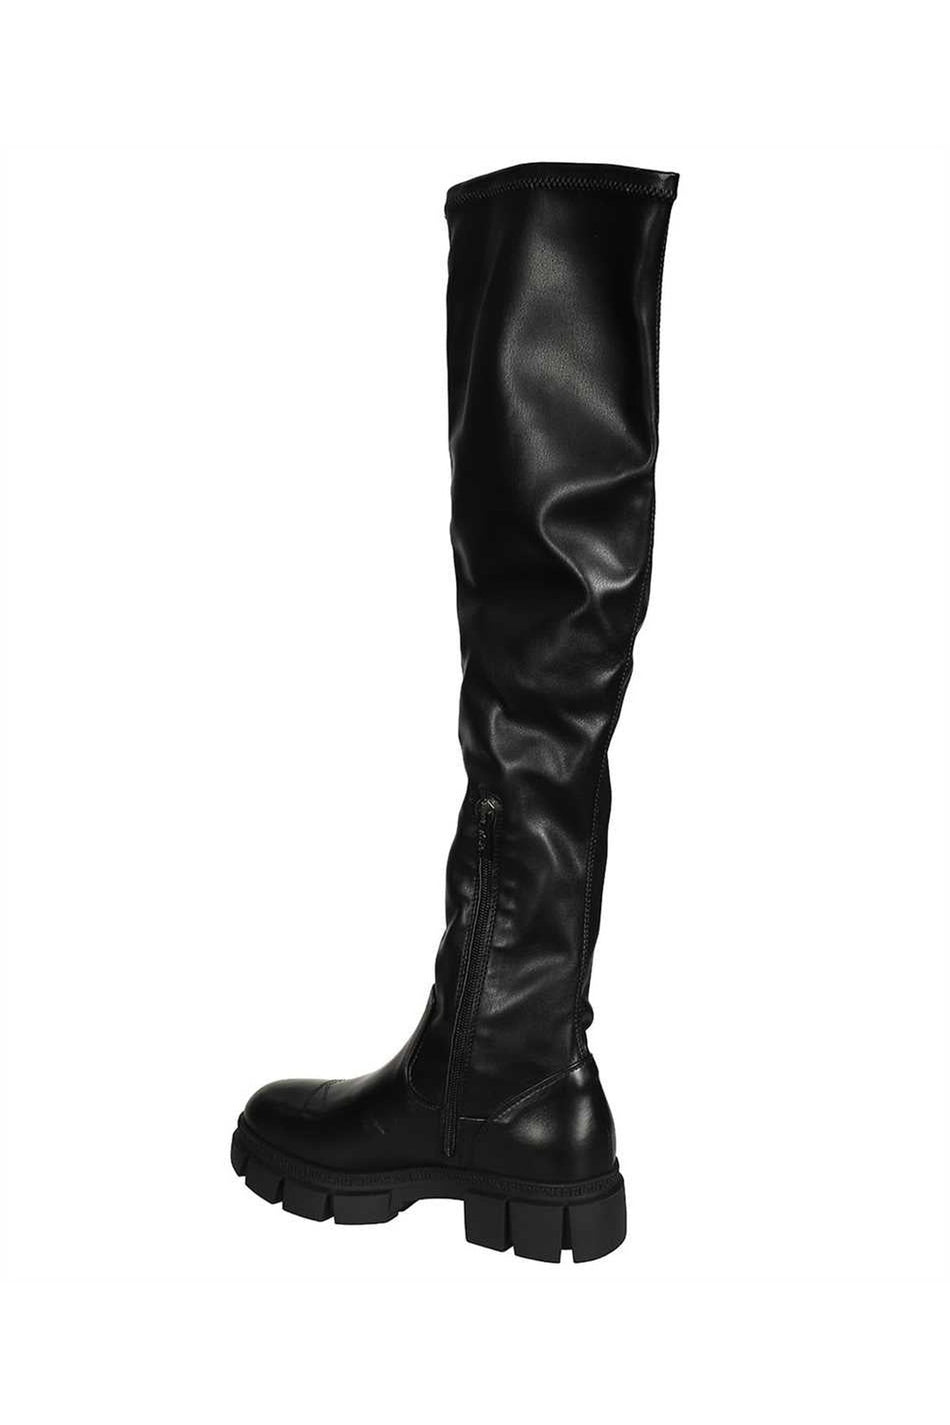 Over-the-knee boots-Karl Lagerfeld-OUTLET-SALE-ARCHIVIST